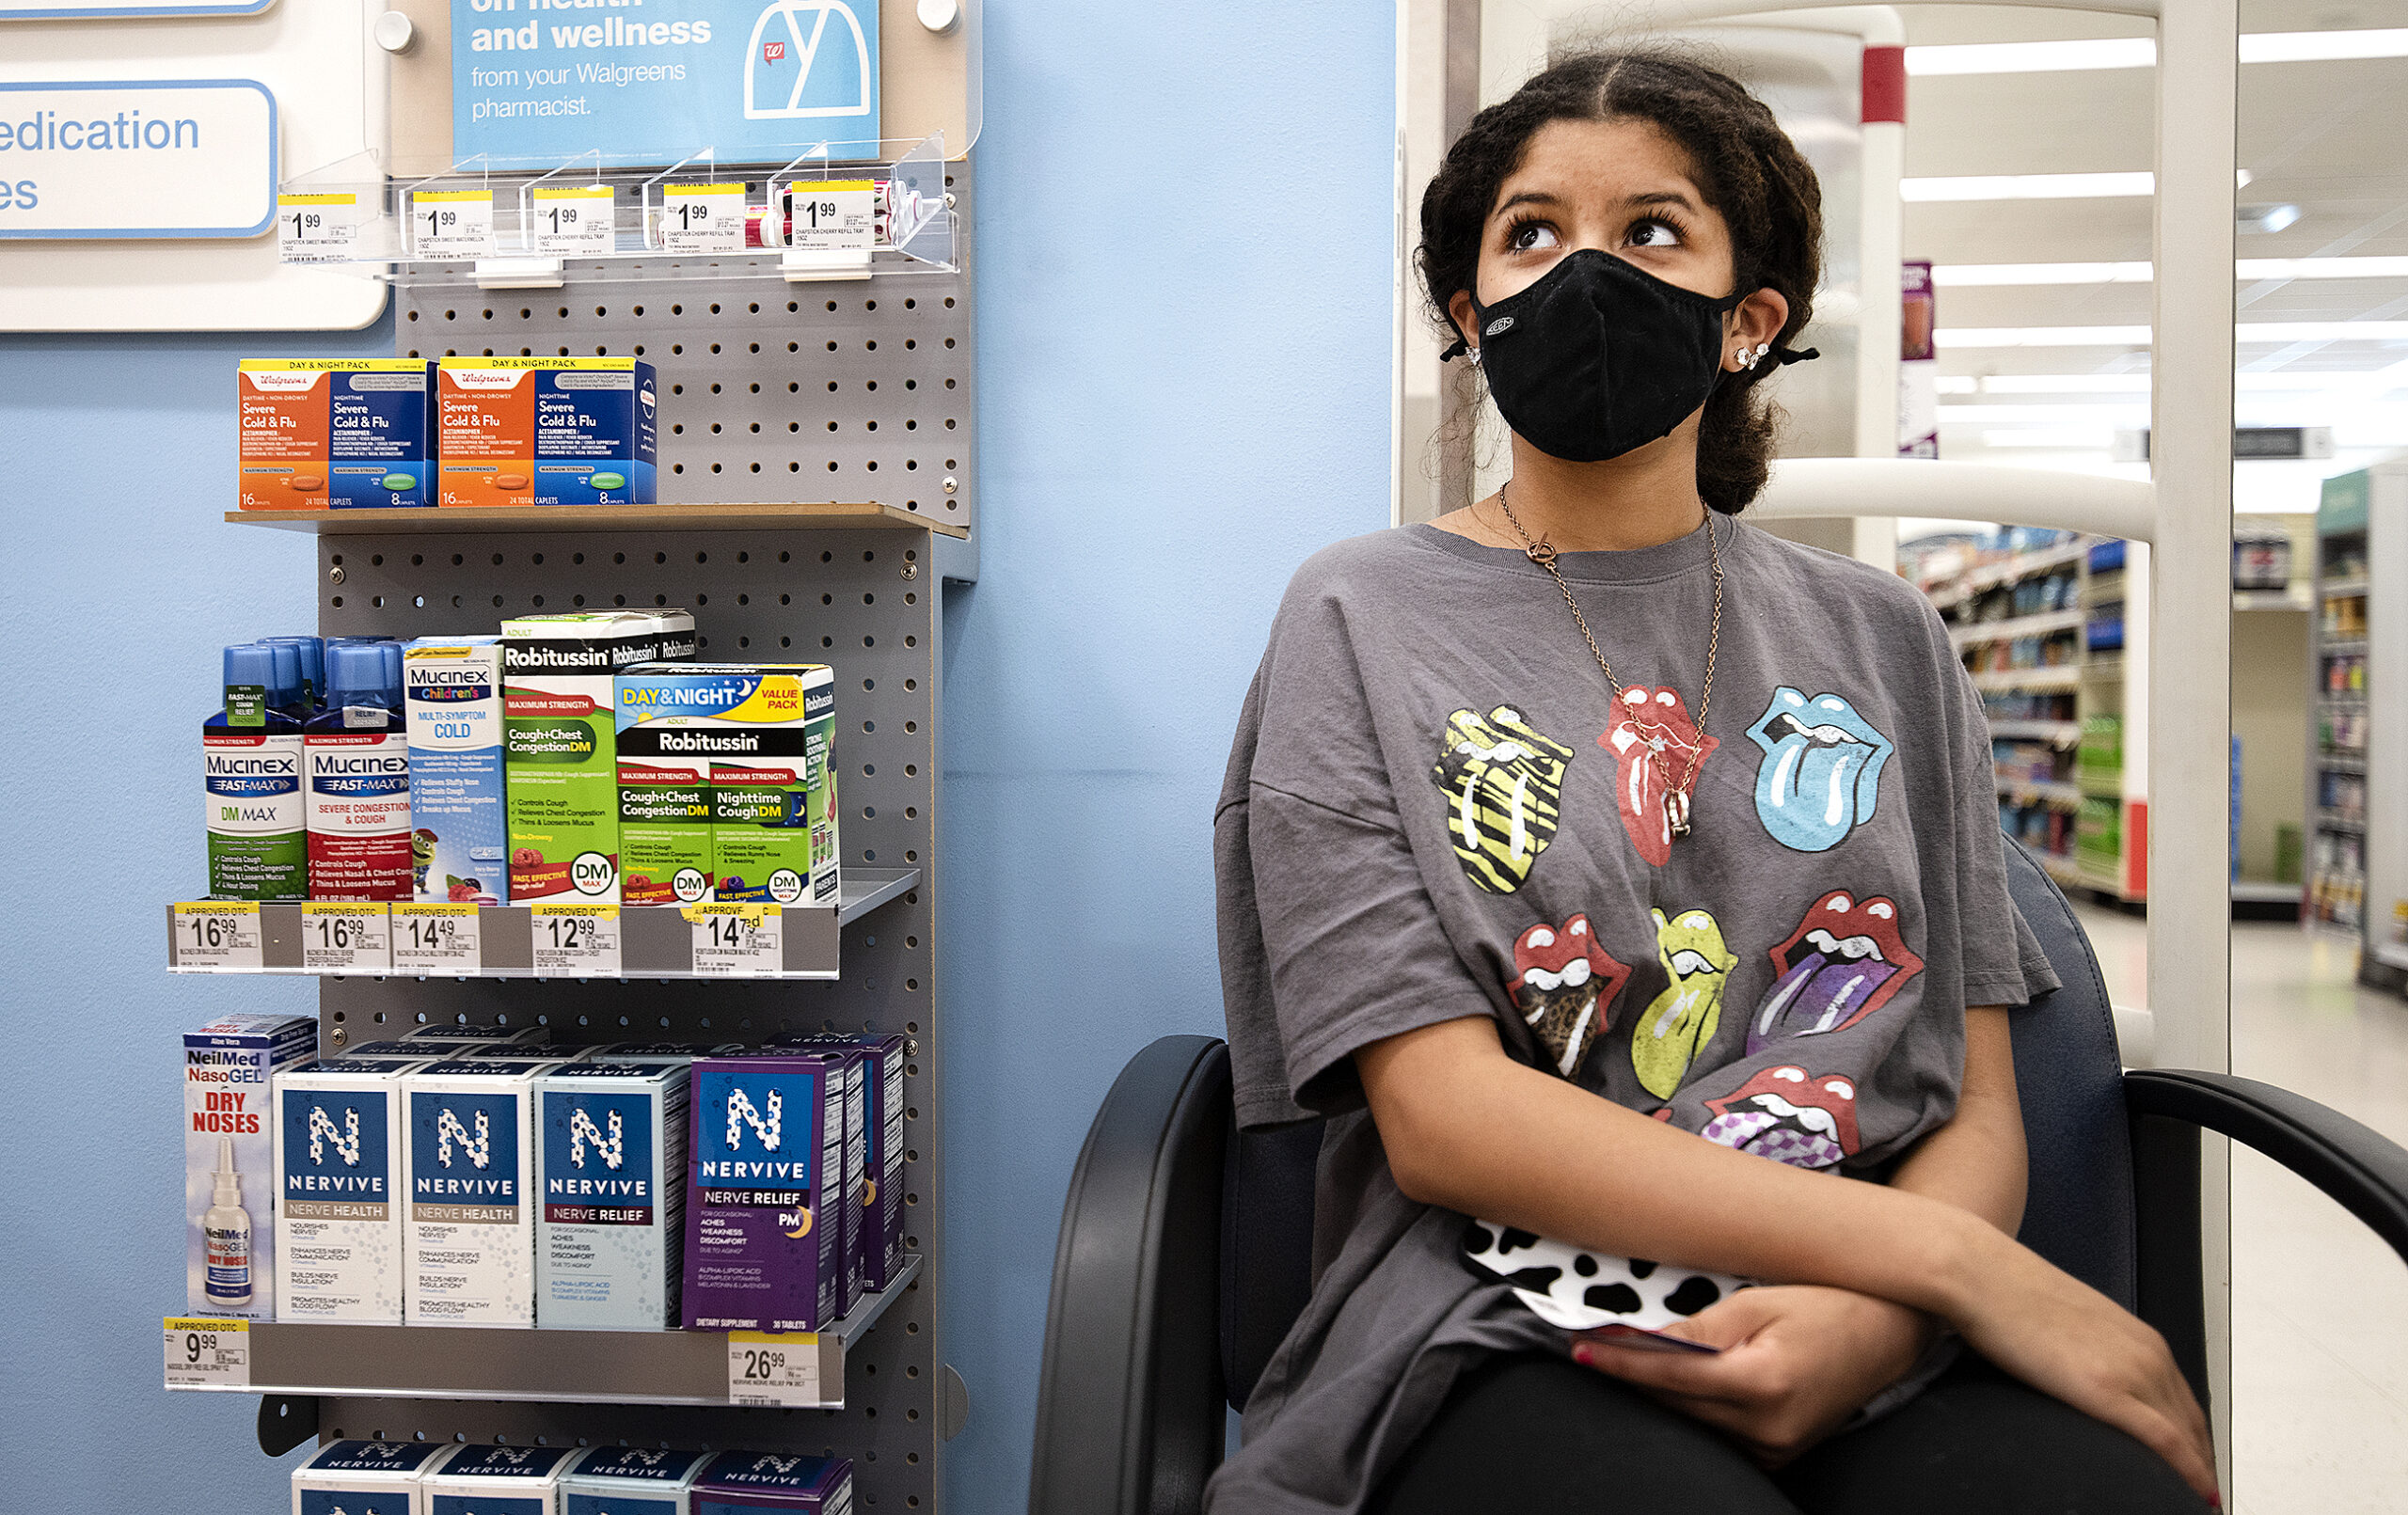 A girl in a t-shirt and face mask sits near products in a pharmacy.